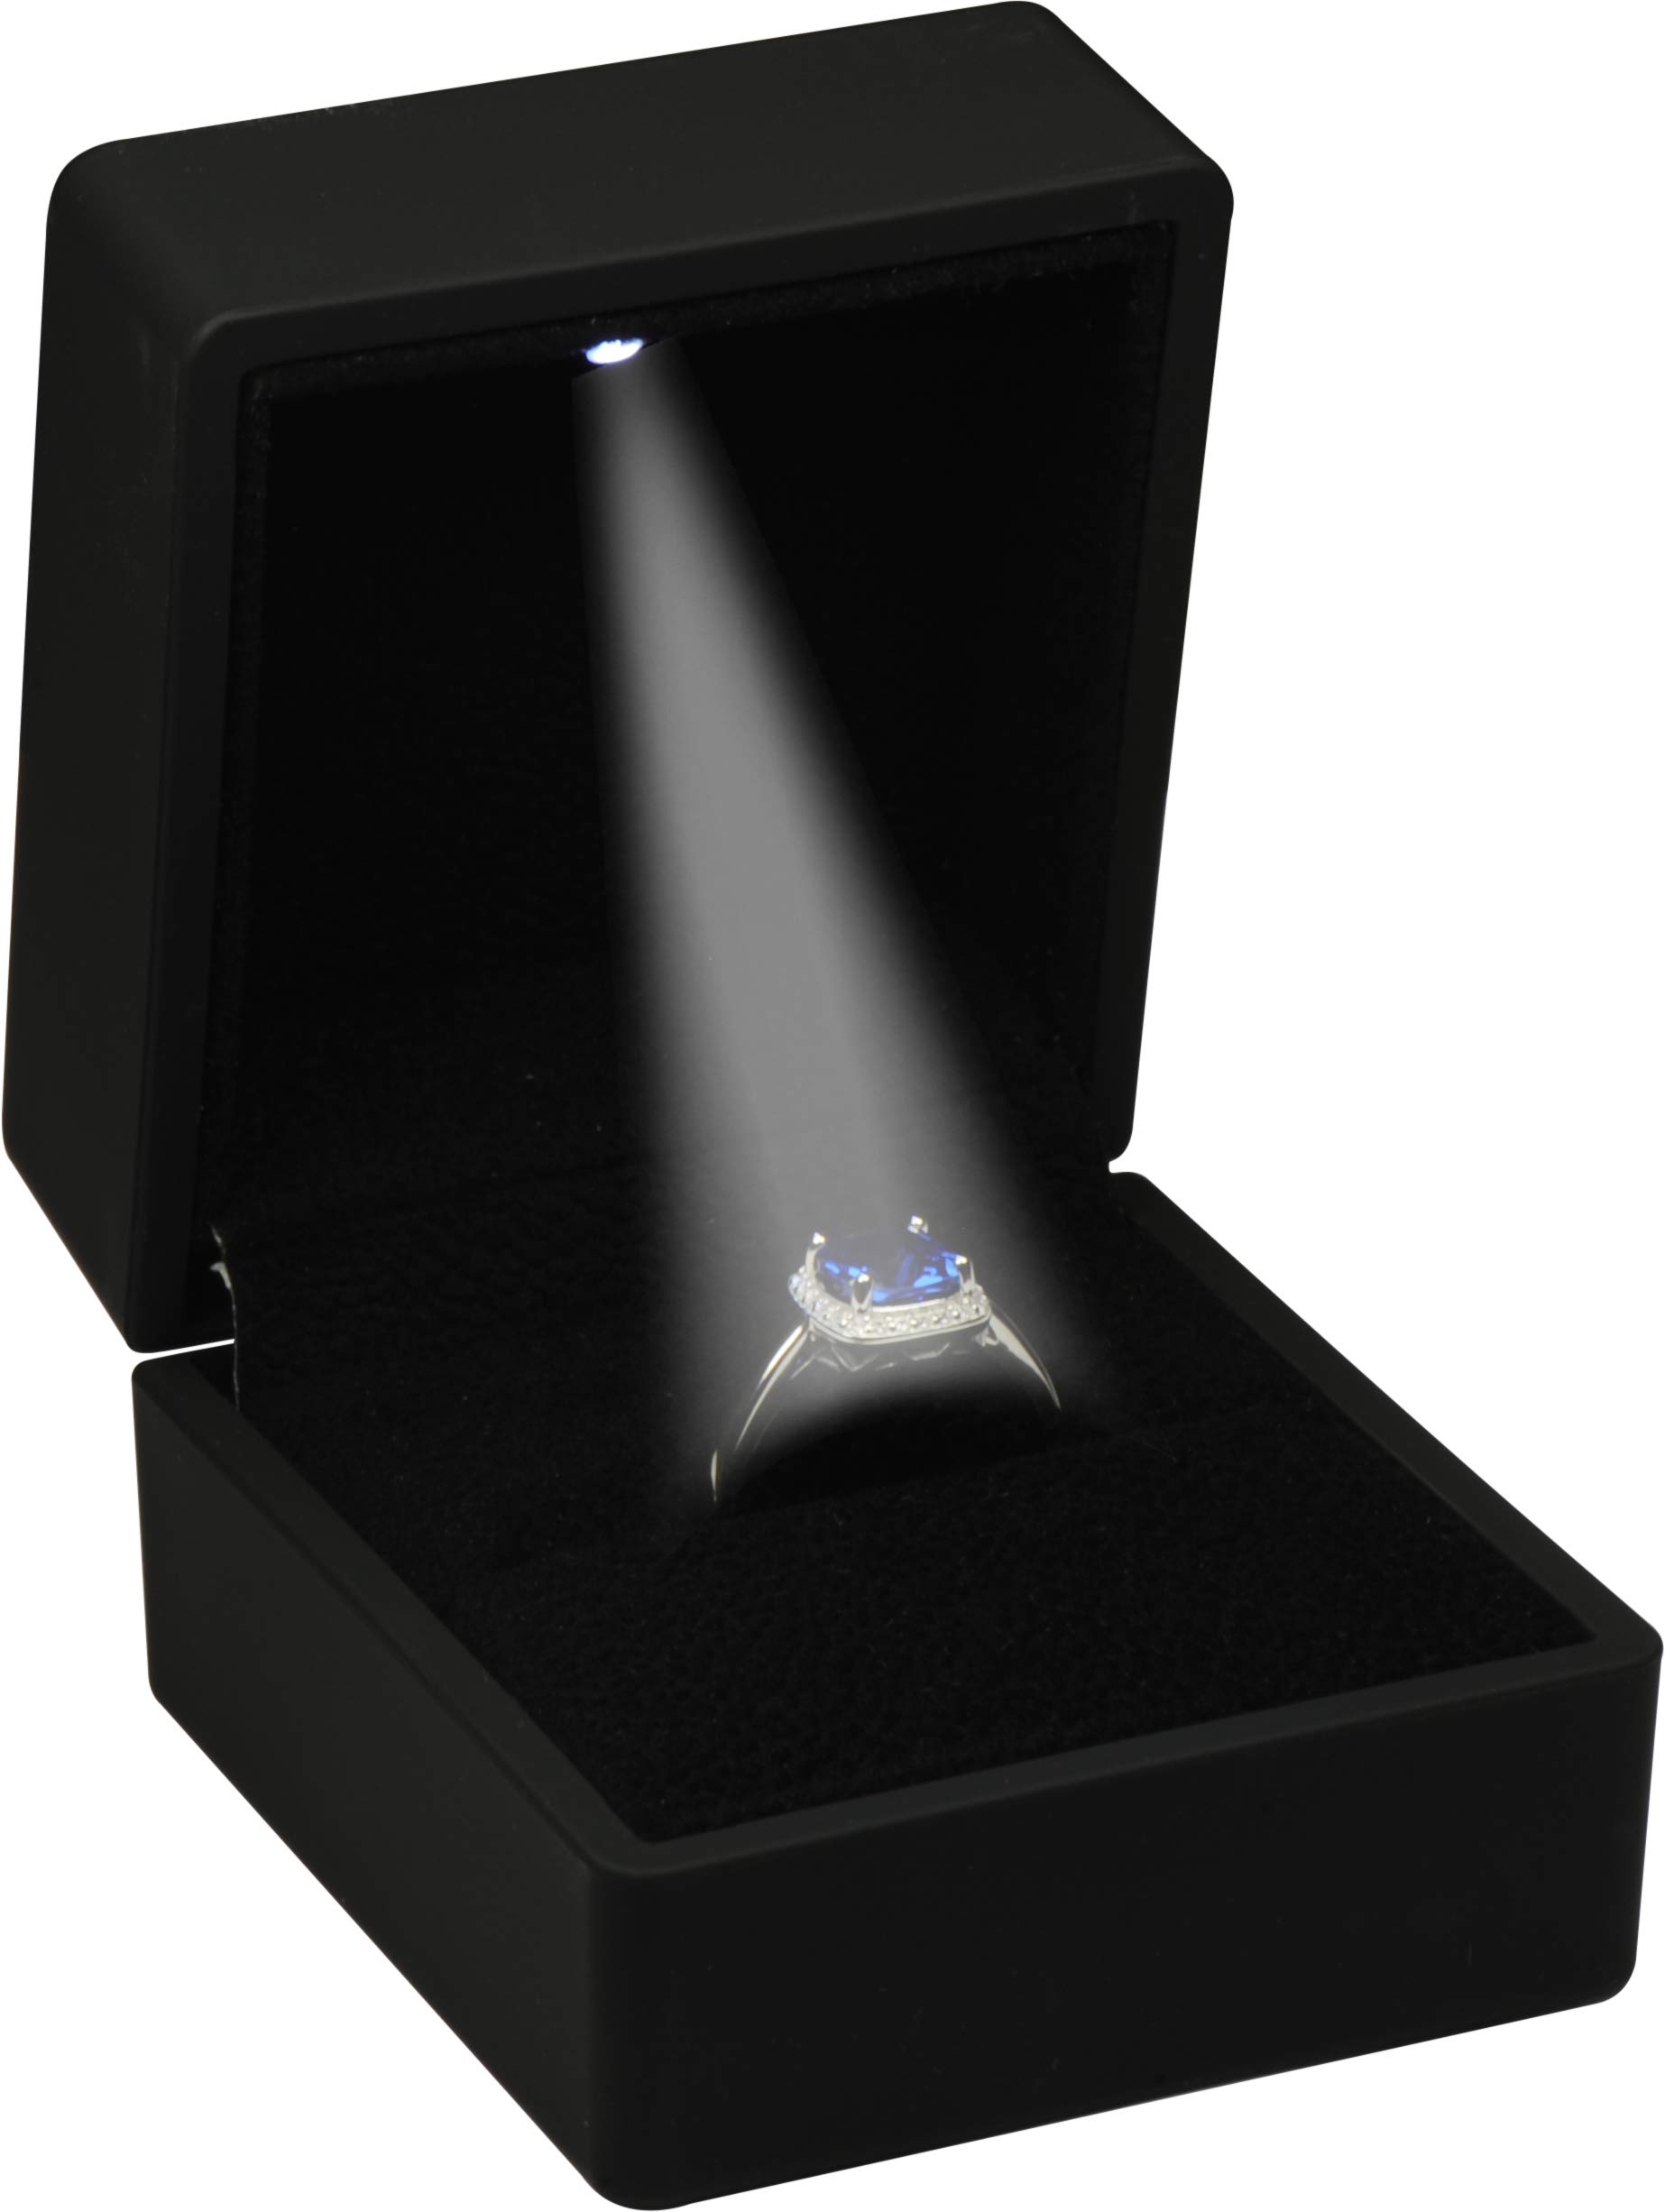 The Jewellery Pak LED Black Ring Box for Proposal, Wedding, Engagement, Valentine Day, Mother's Father's Christmas Luxury Jewelry Gift with Light Dimension 2.36(W)x2.56(D)x1.97(H) inch, Classical